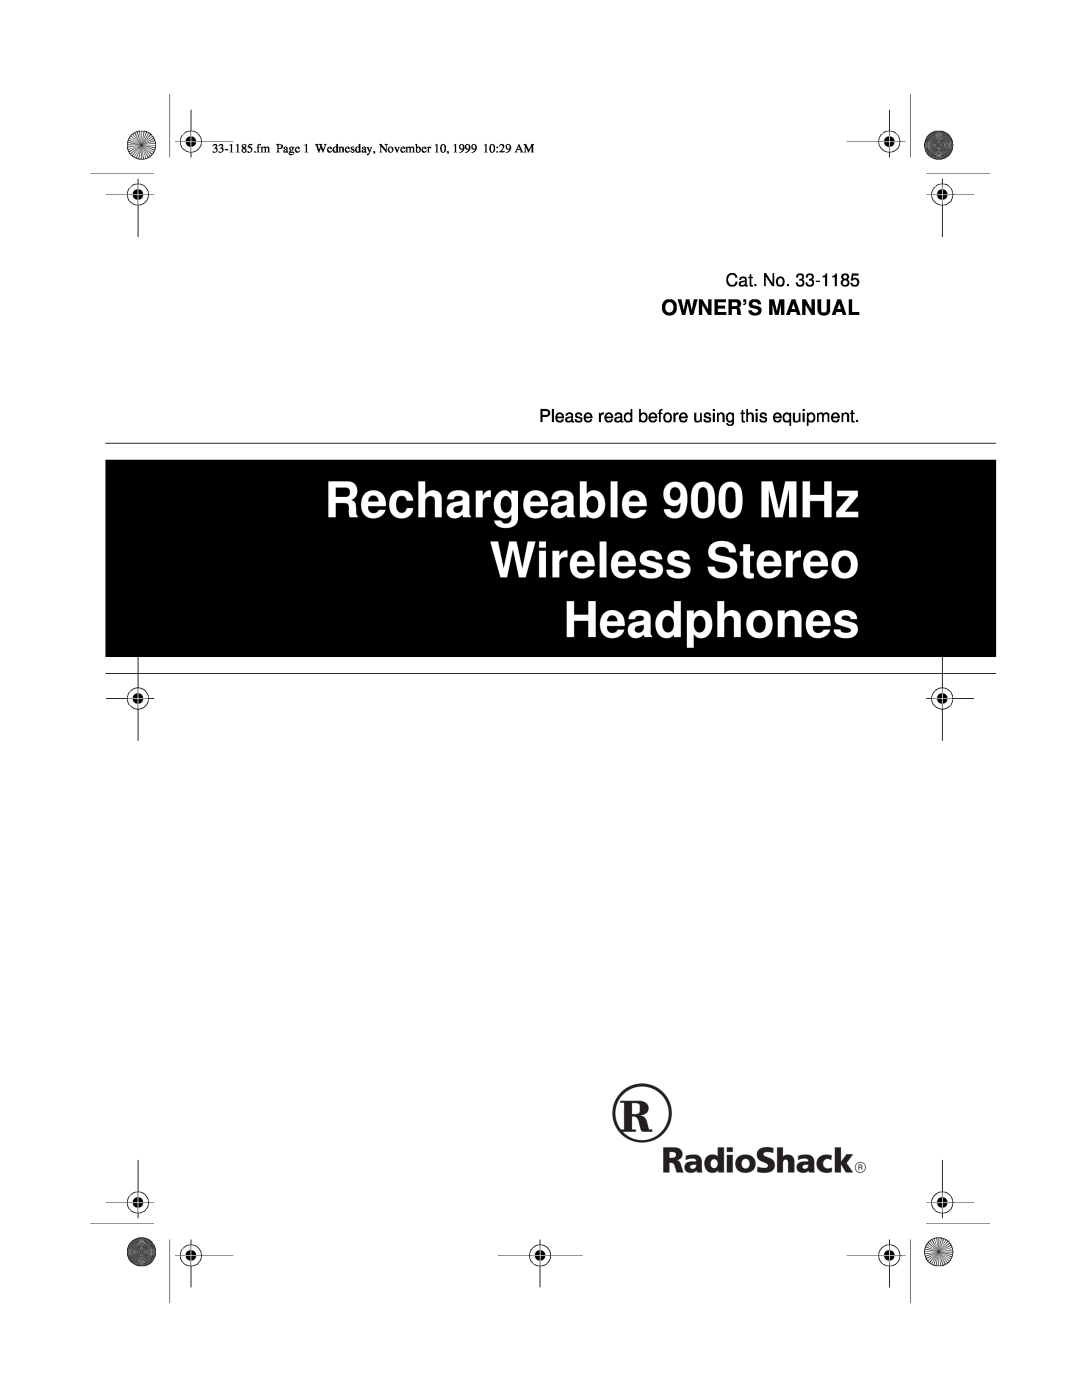 Radio Shack 33-1185 owner manual Rechargeable 900 MHz Wireless Stereo Headphones 